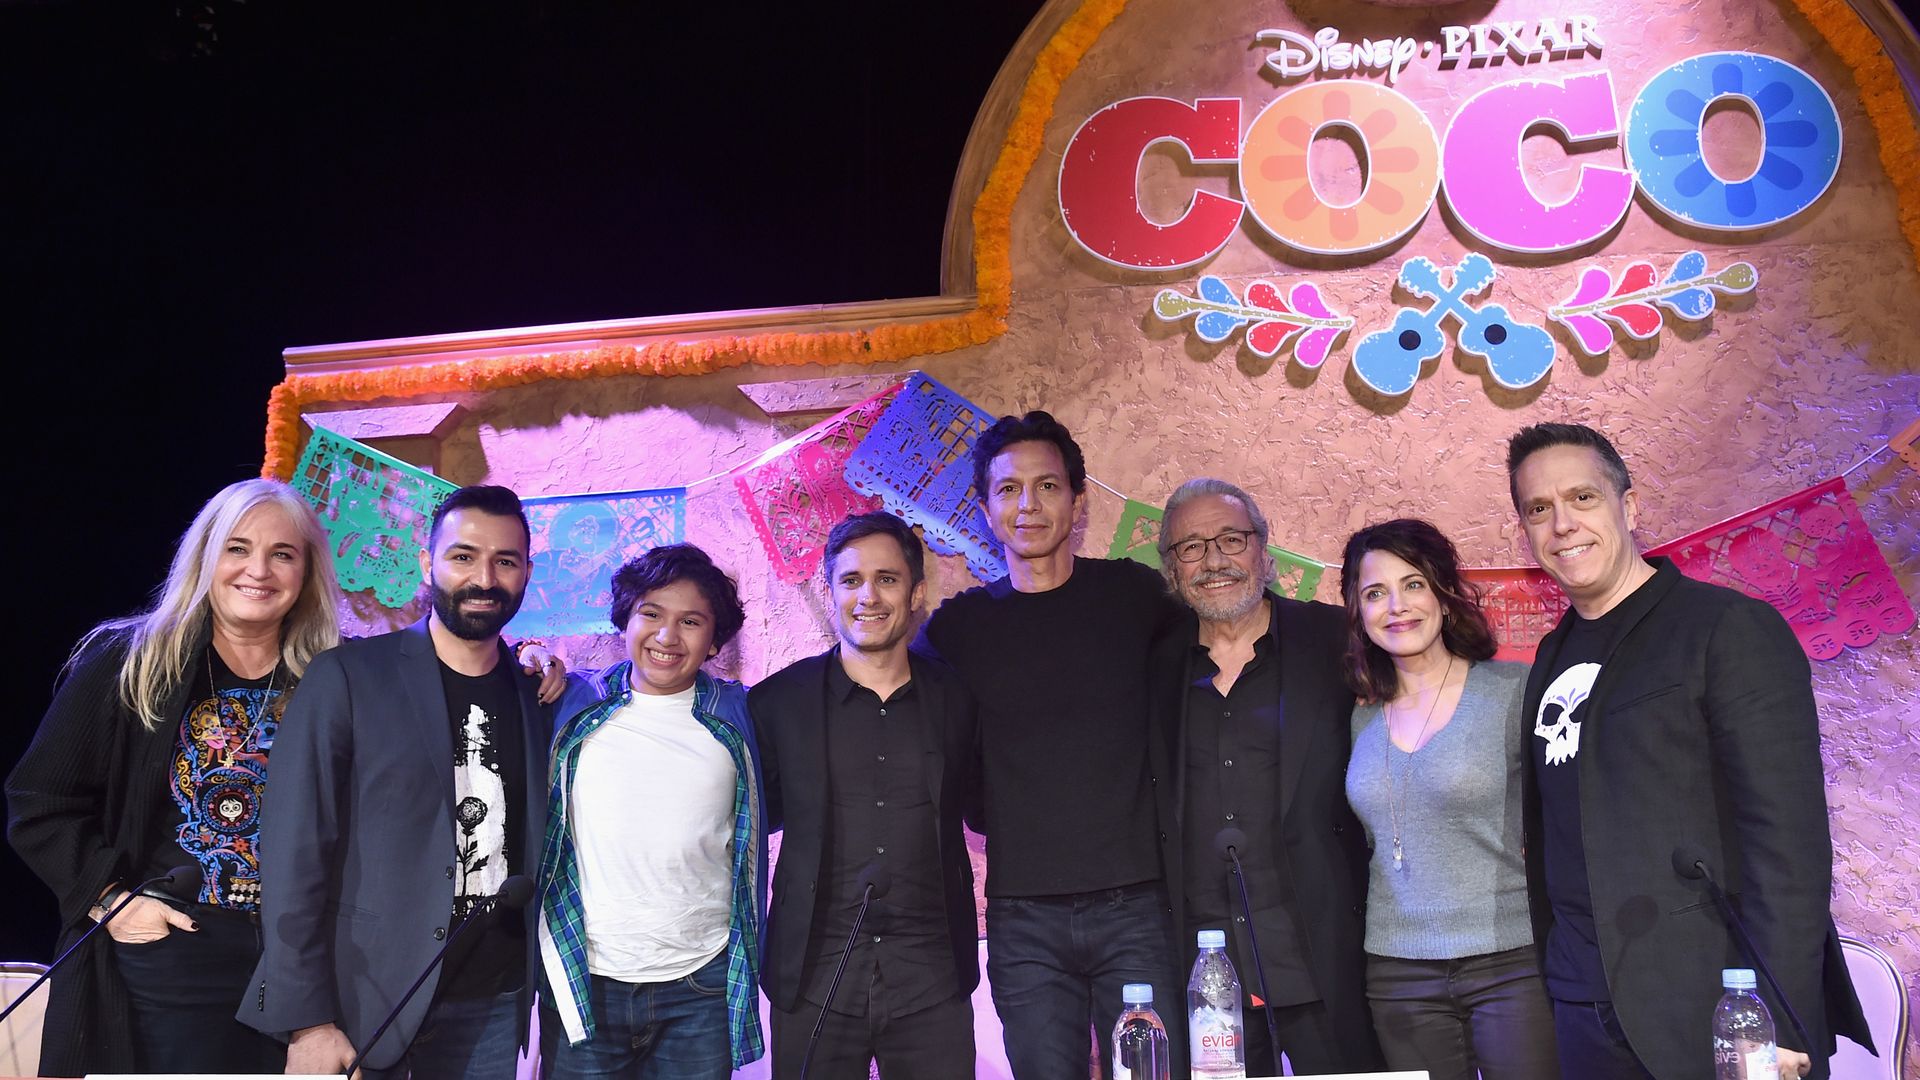 The cast, writers and director for Disney-Pixar's "Coco" at stand after at press conference at The Beverly Hilton Hotel.